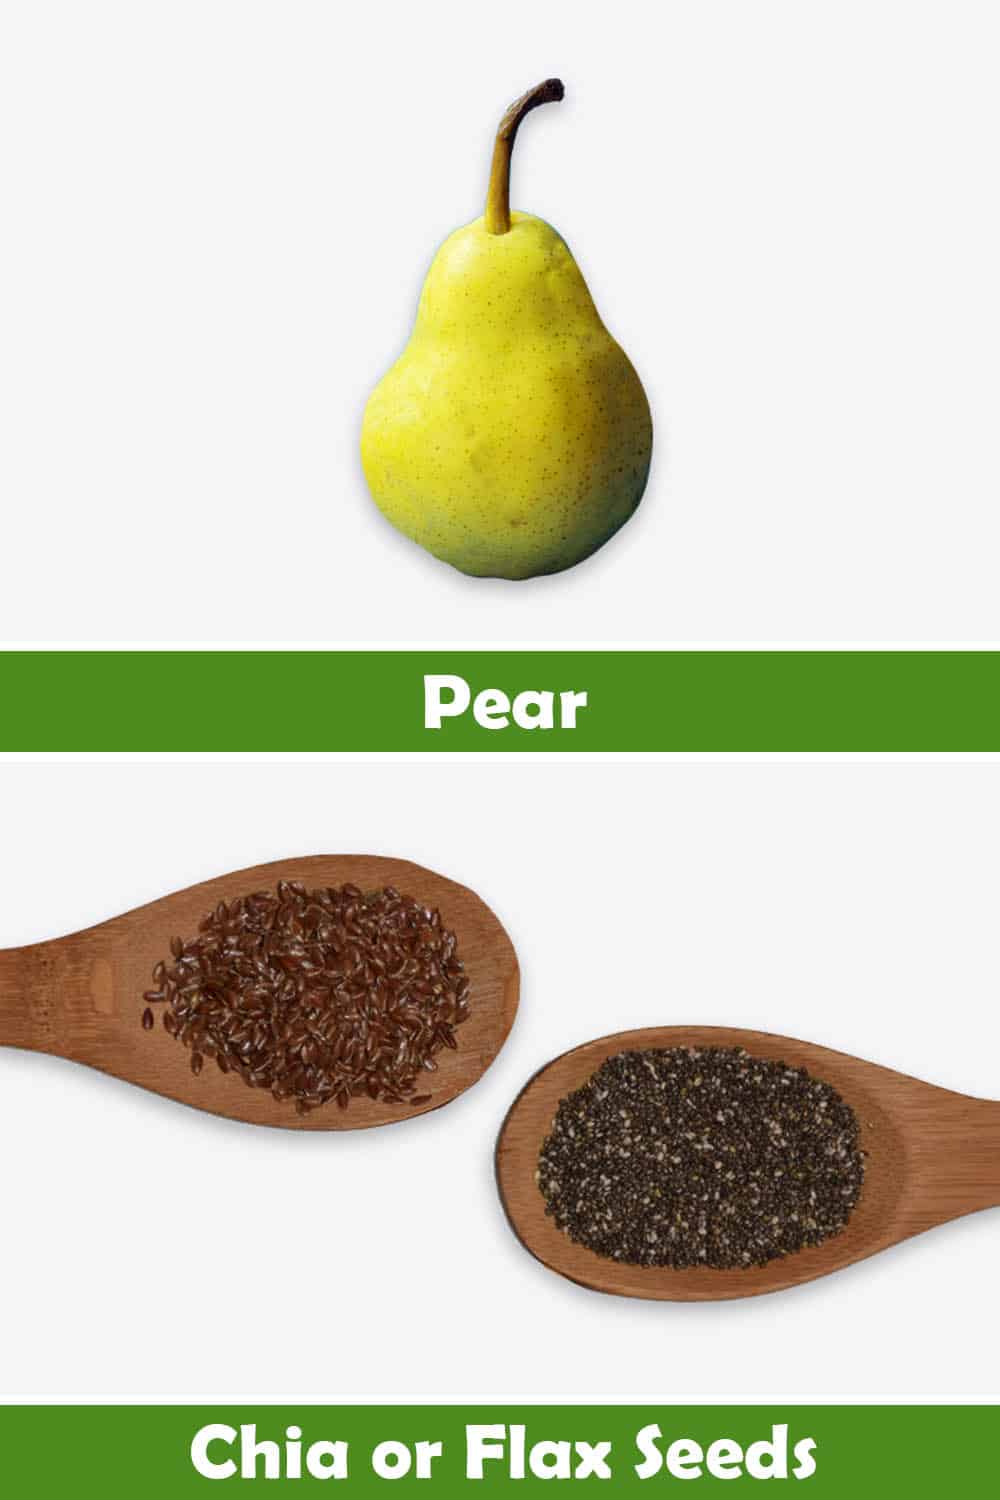 PEAR AND CHIA OR FLAX SEEDS